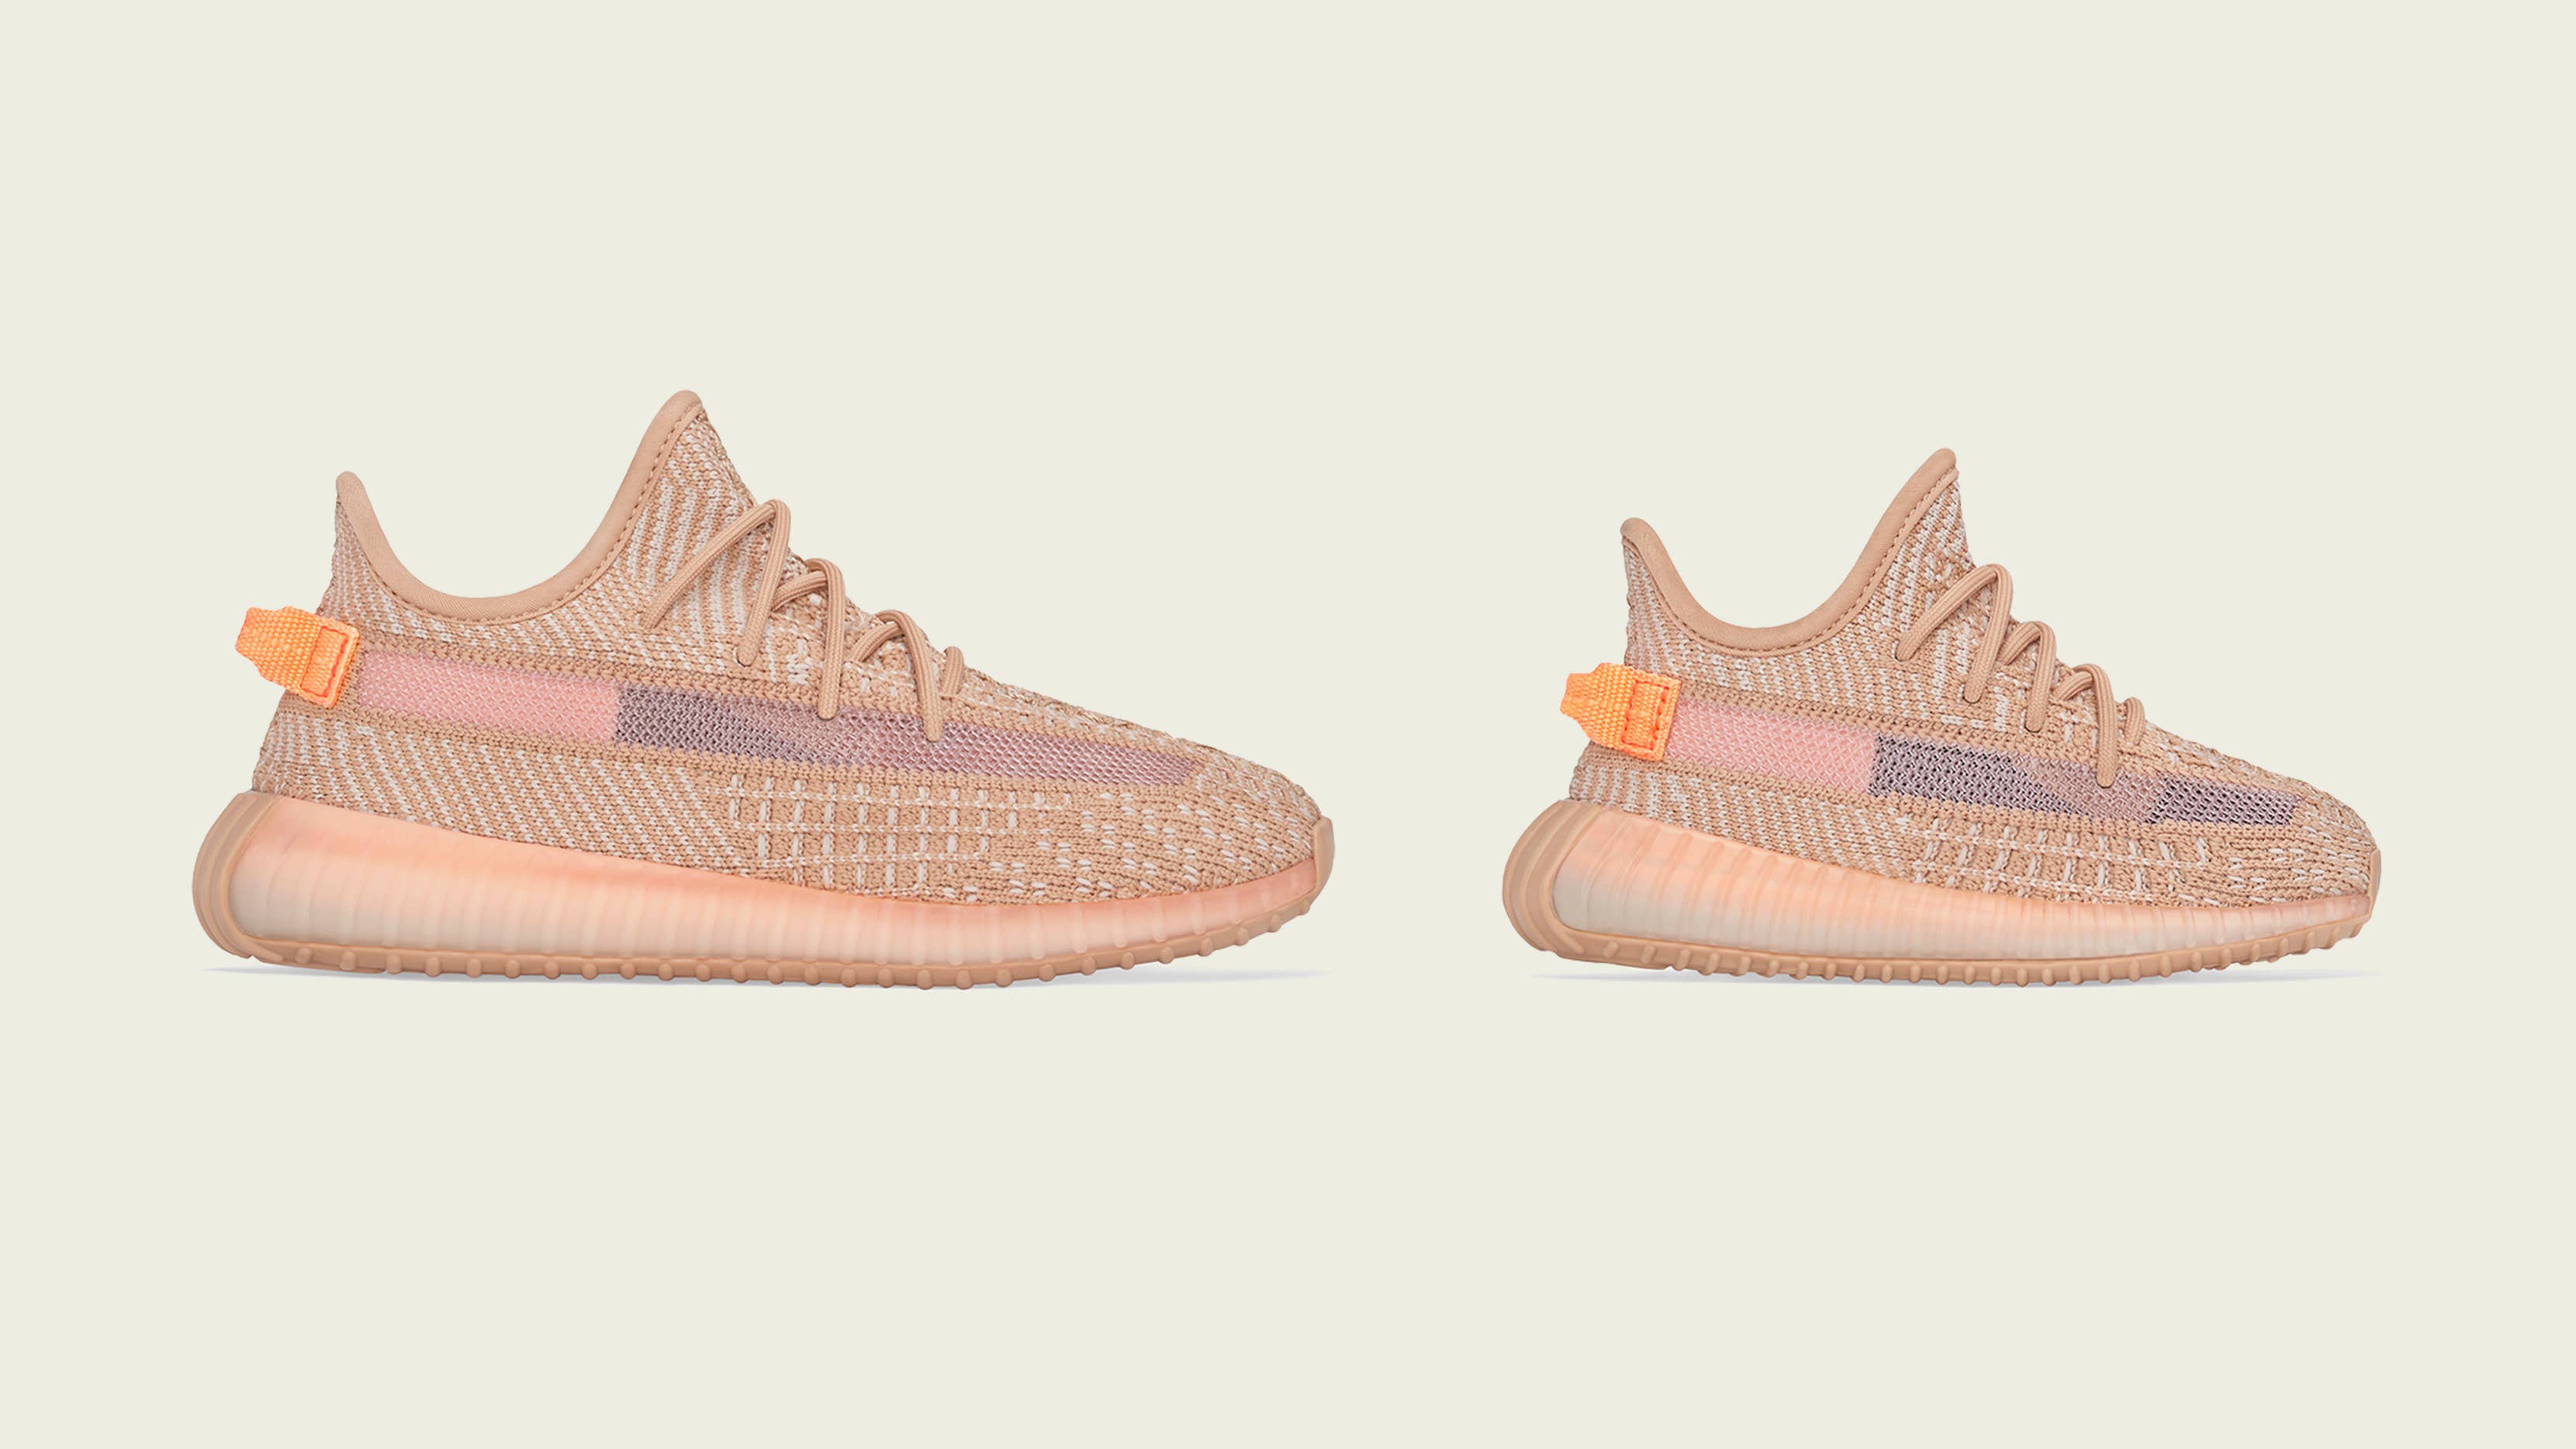 Adidas Yeezy Boost 350 V2 'Clay' Kids (Right)